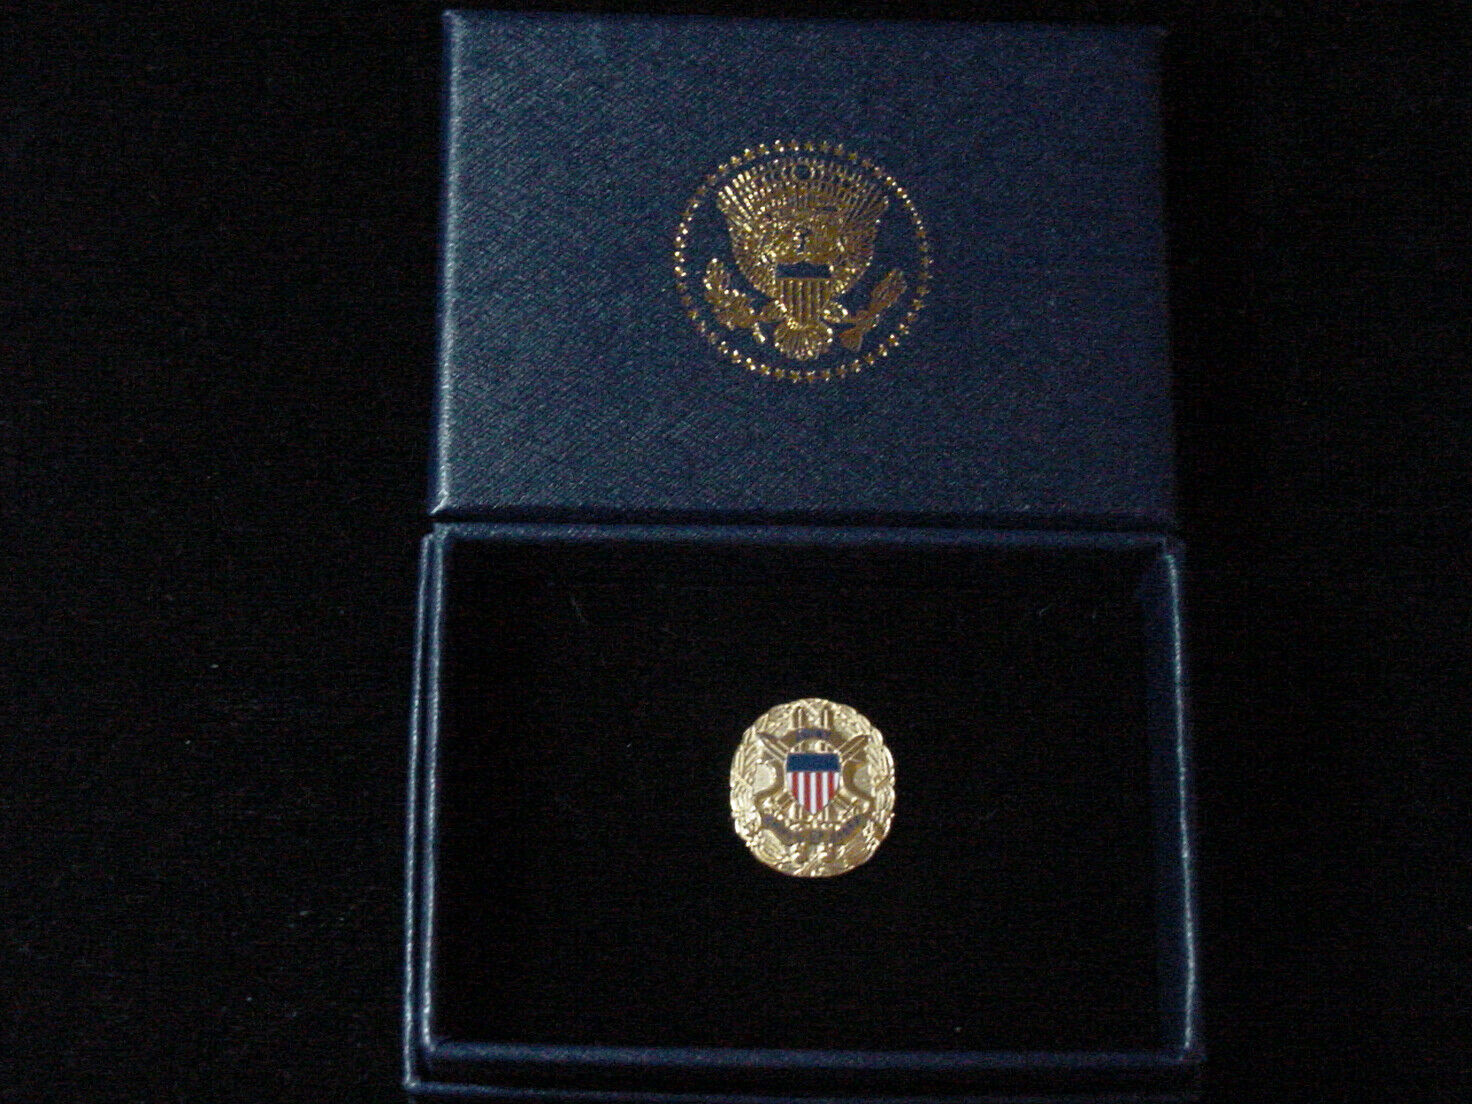  Presidential JOINT CHIEFS OF STAFF LAPEL PIN